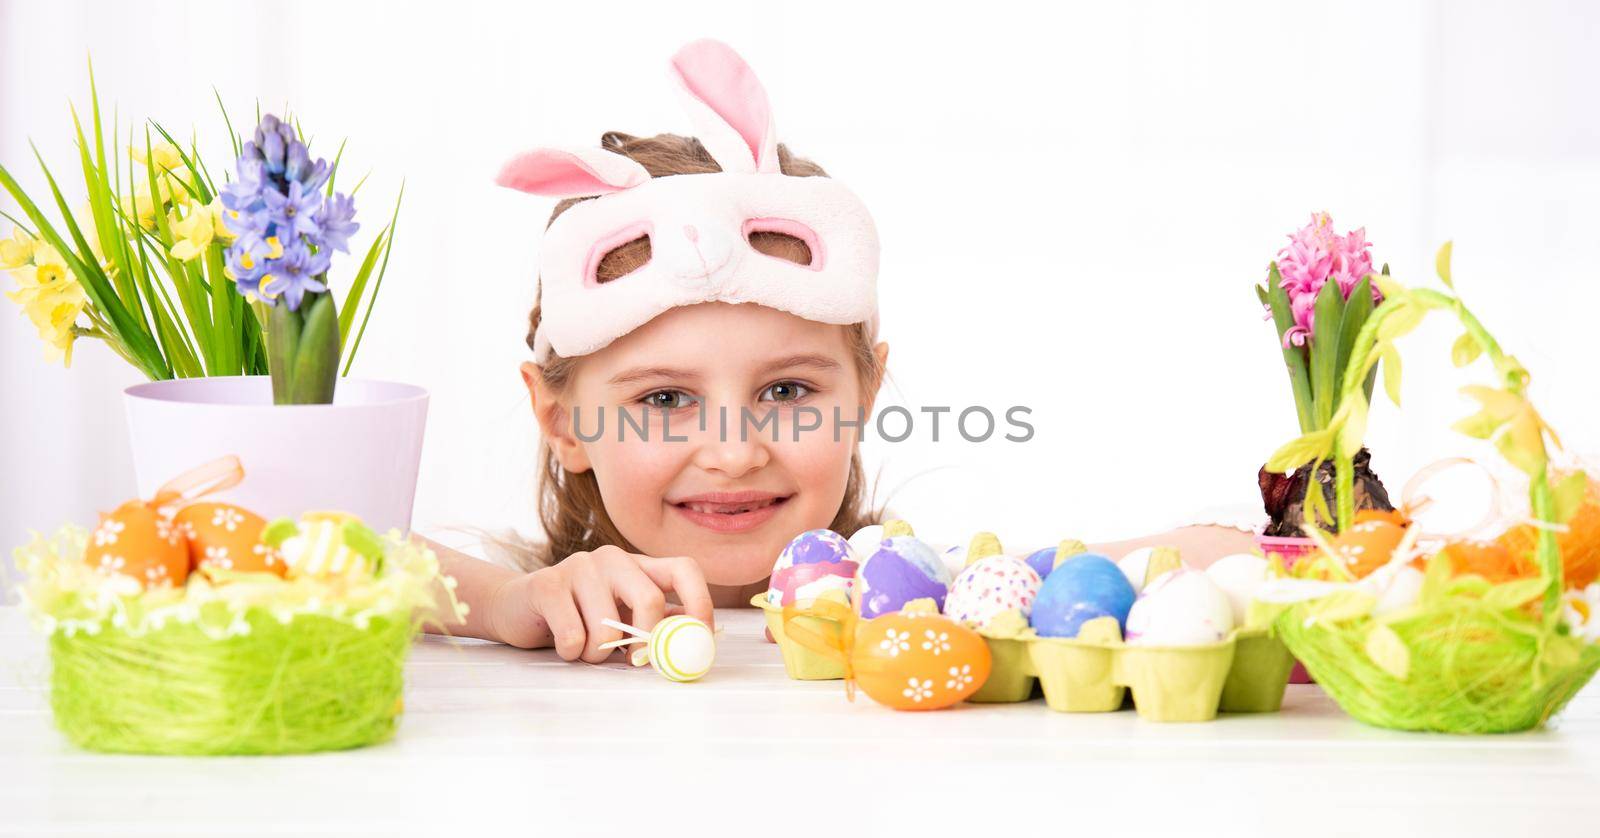 Happy smiling child peals from behind traditional and beatiful Easter decorations, isolated on white background